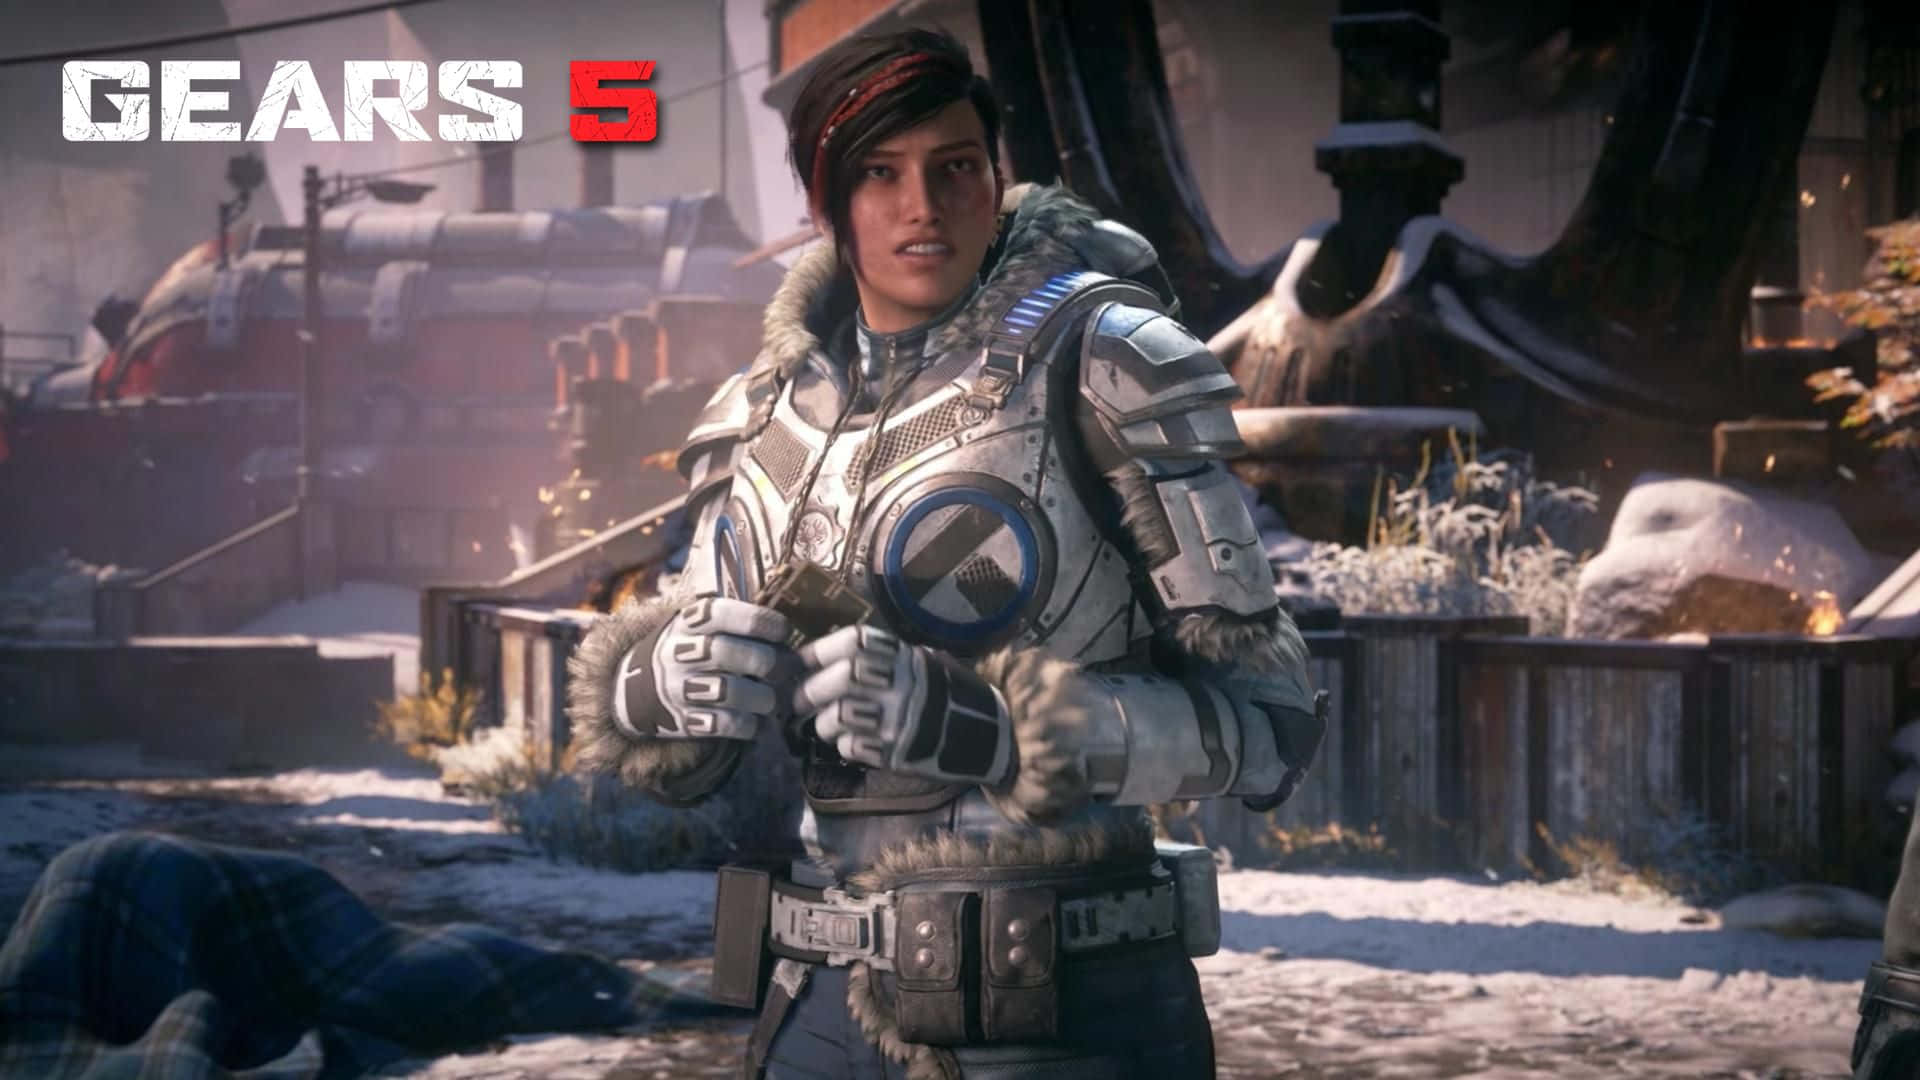 Gears 5 - A Woman In A Snowy Environment